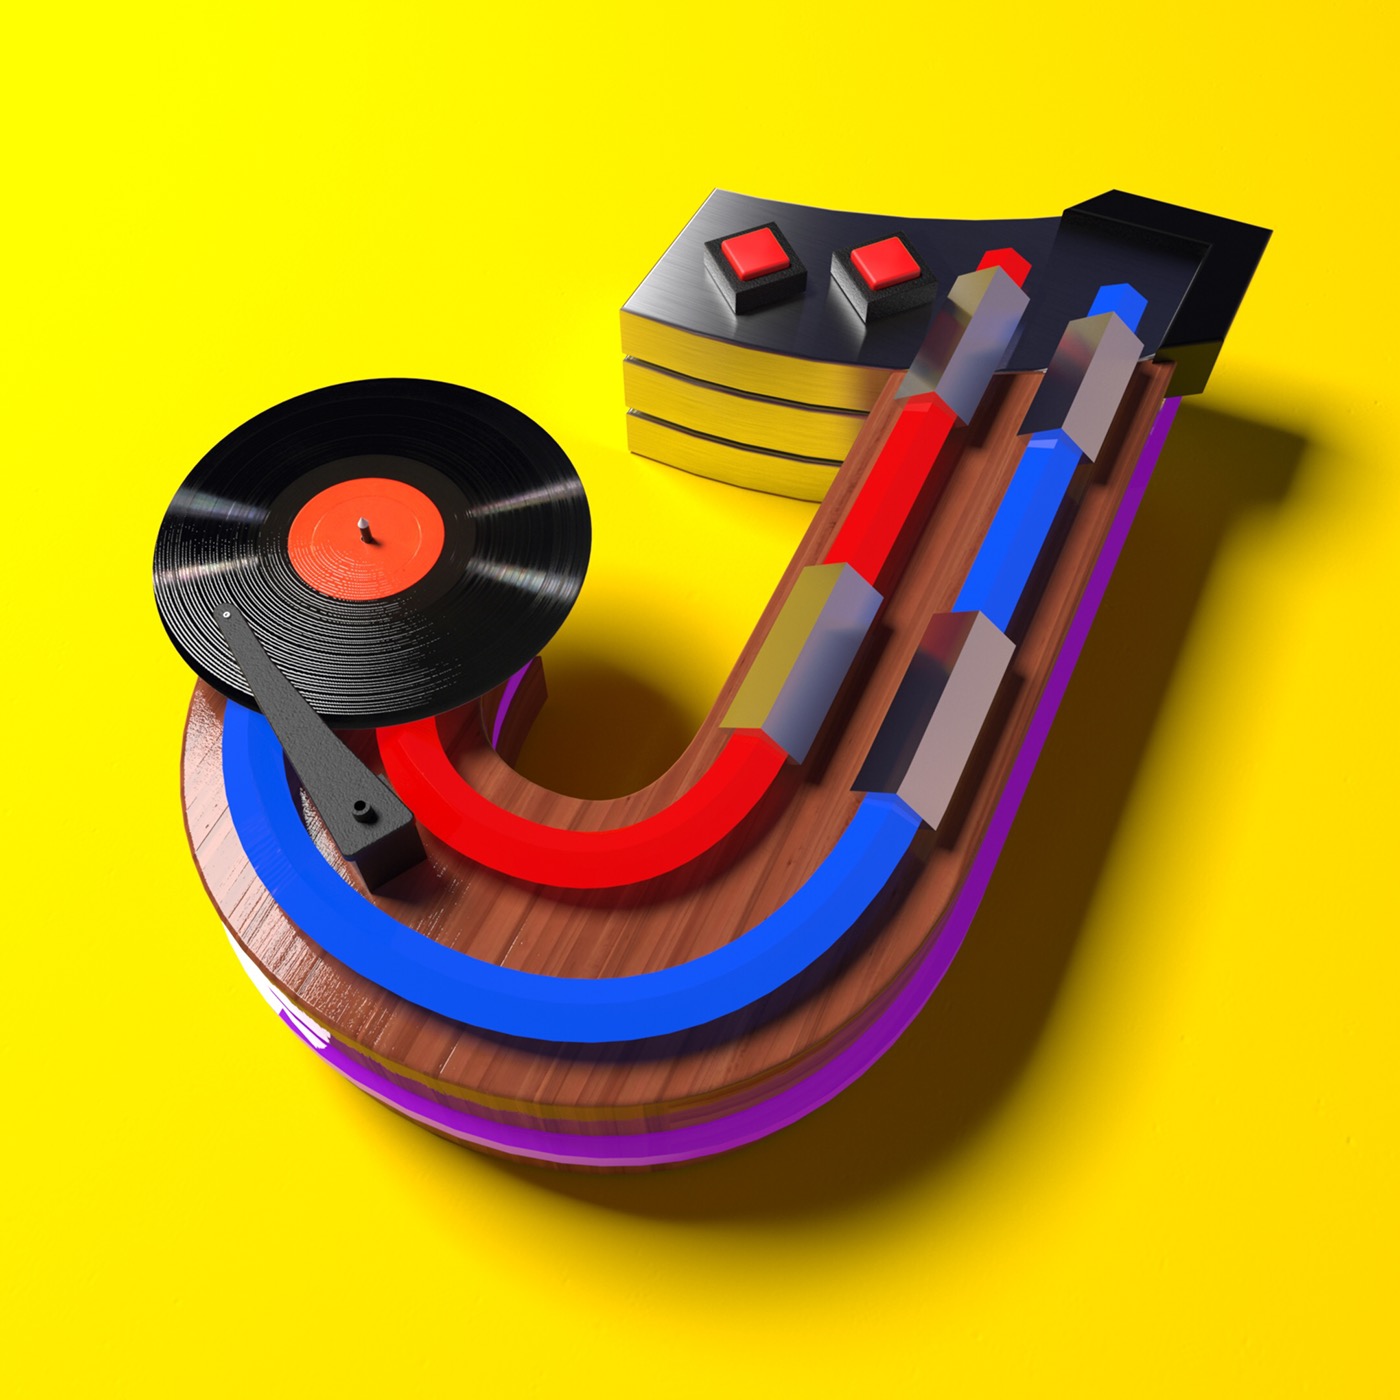 36daysoftype 3D Type CG colors a-ztypography typography  